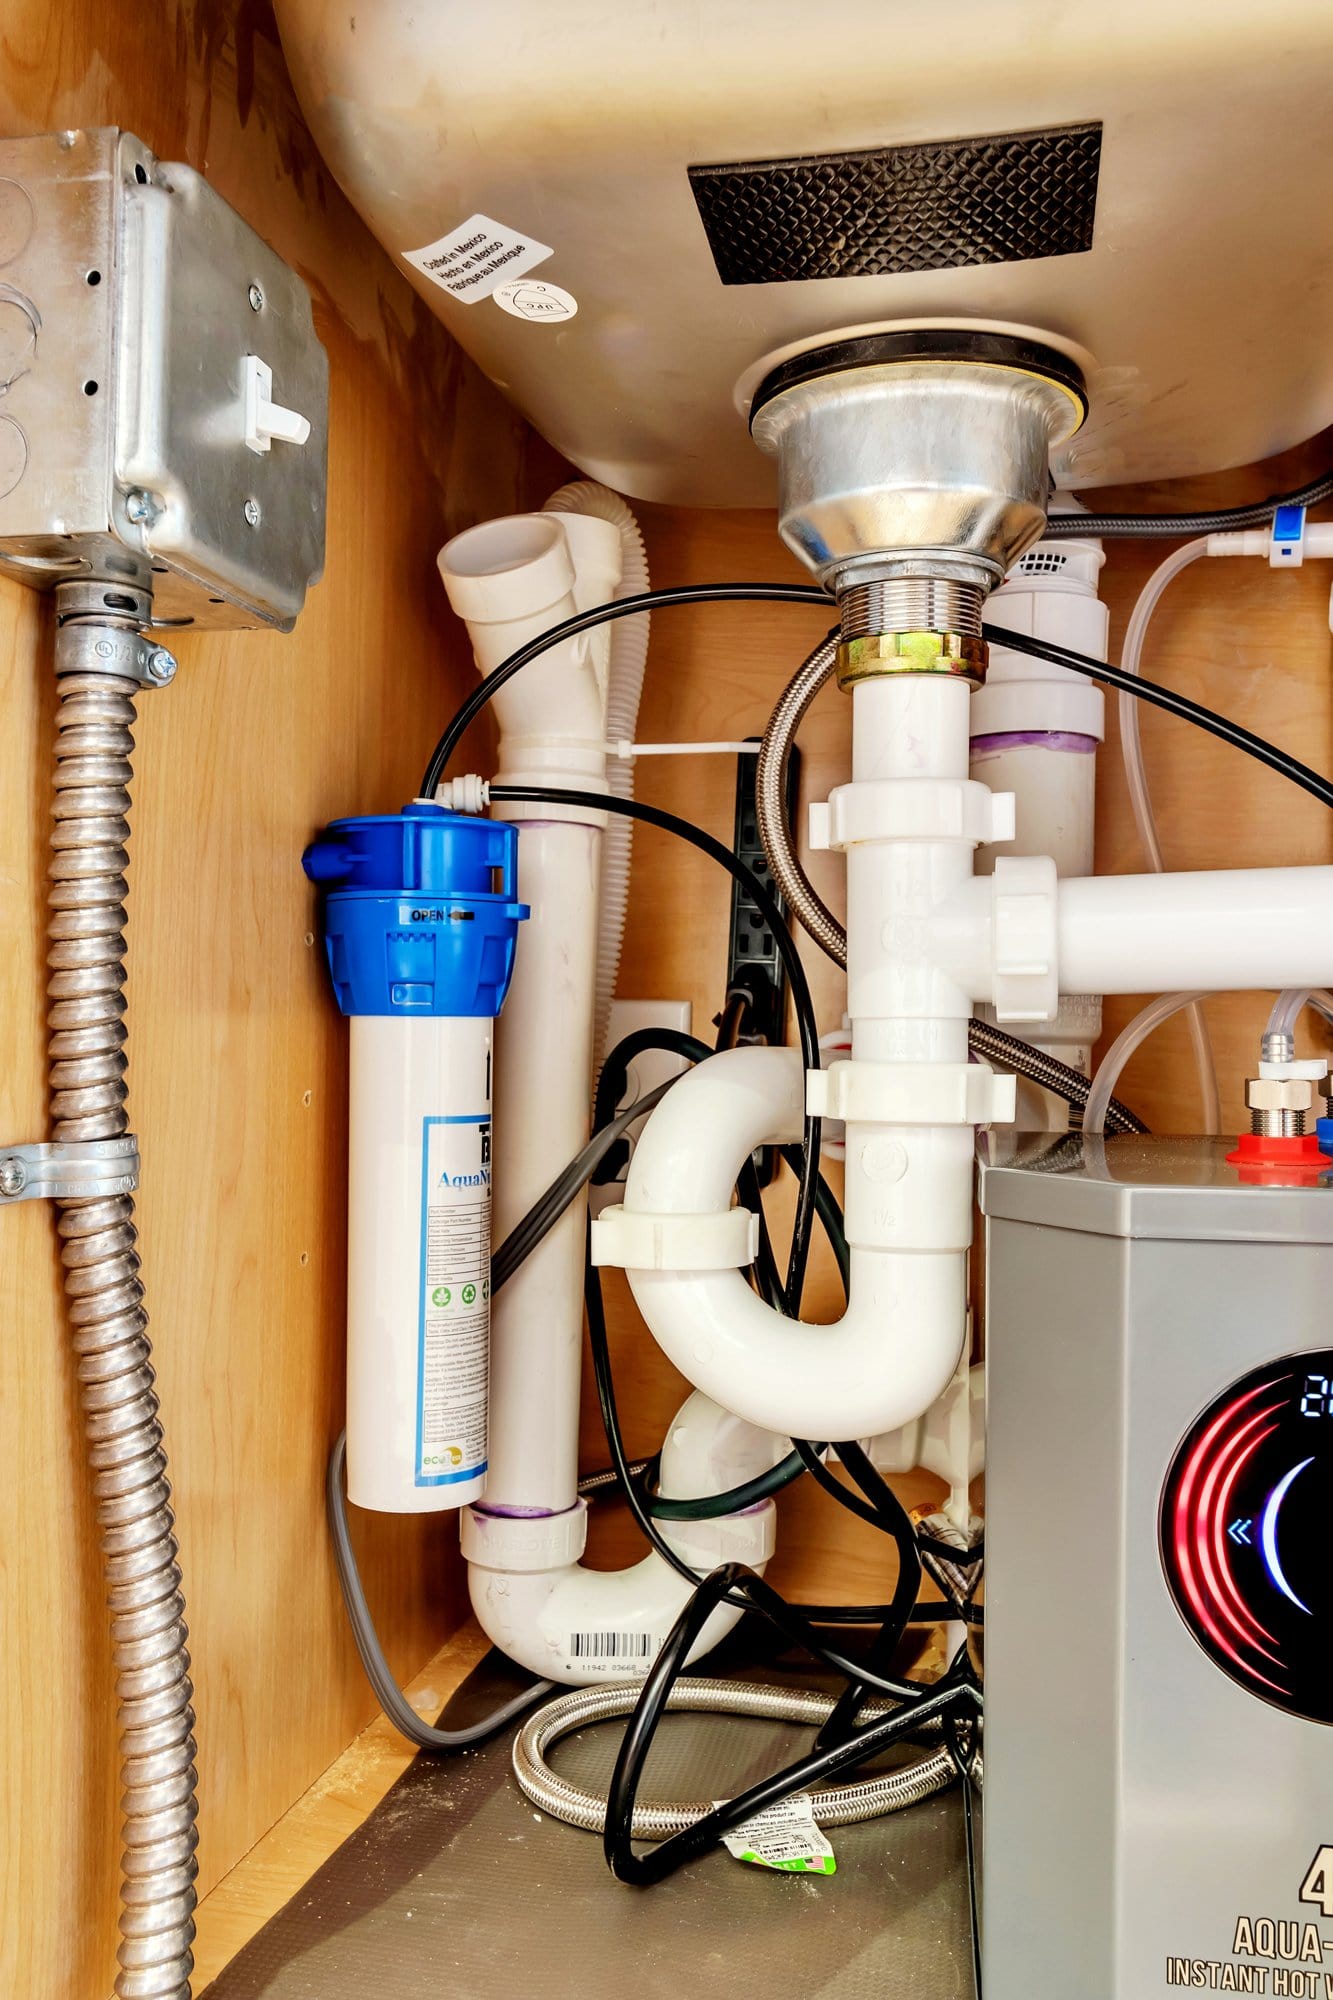 How Do Water Chillers & Instant Hot Water Dispensers Work? – Fresh Water  Systems